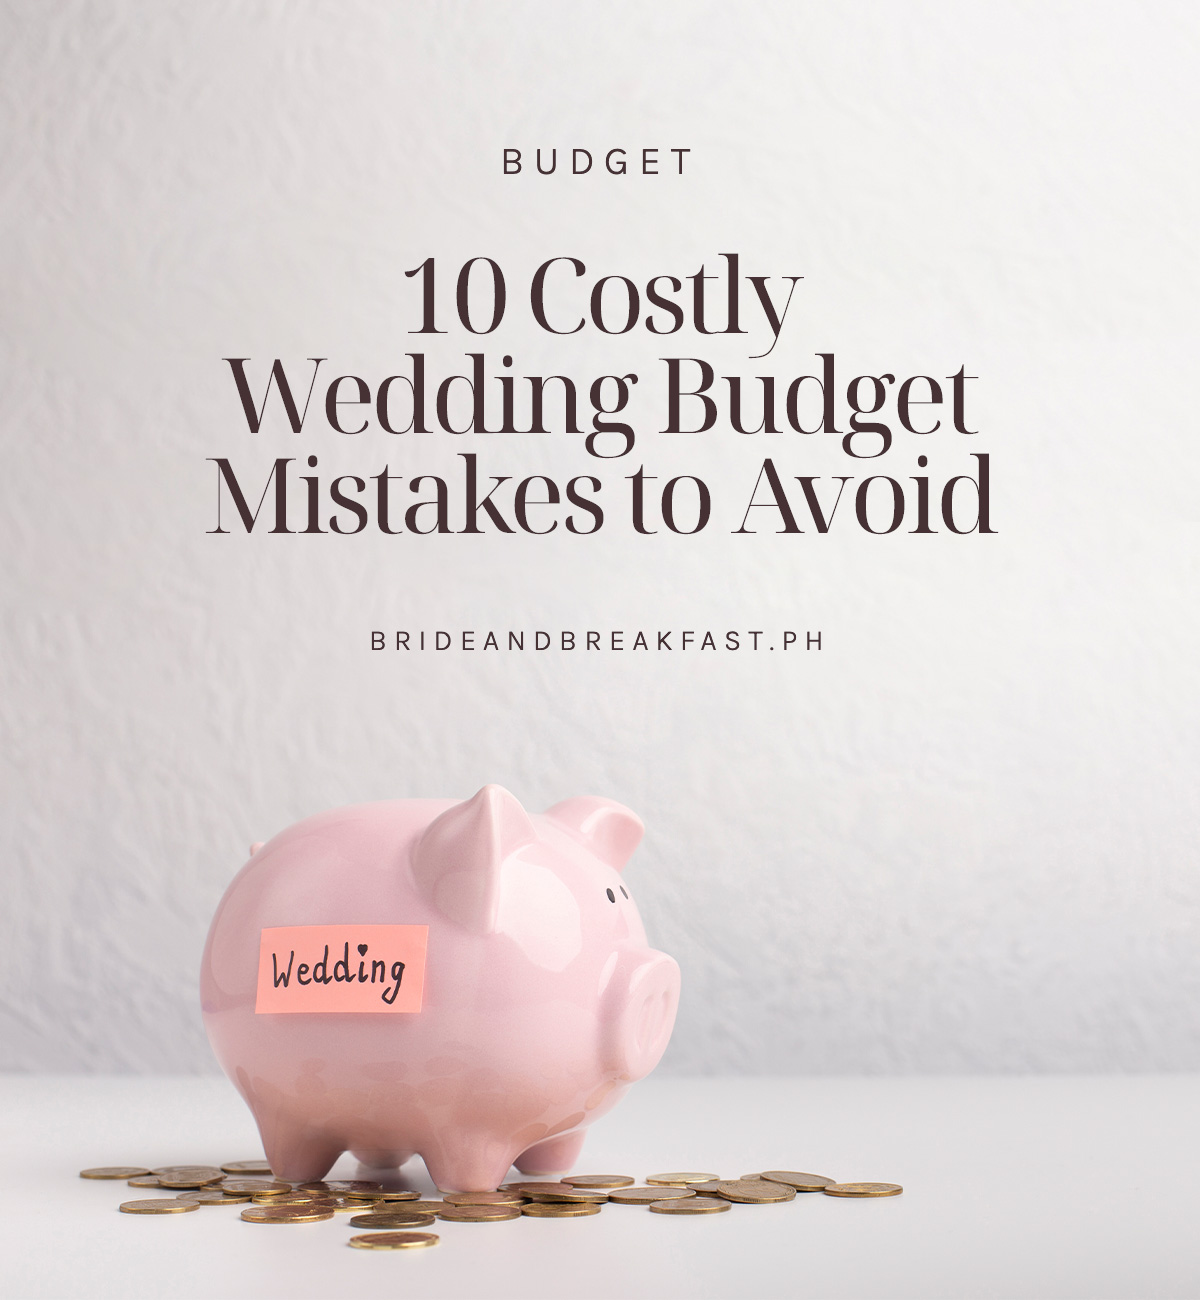 10 Costly Wedding Budget Mistakes to Avoid